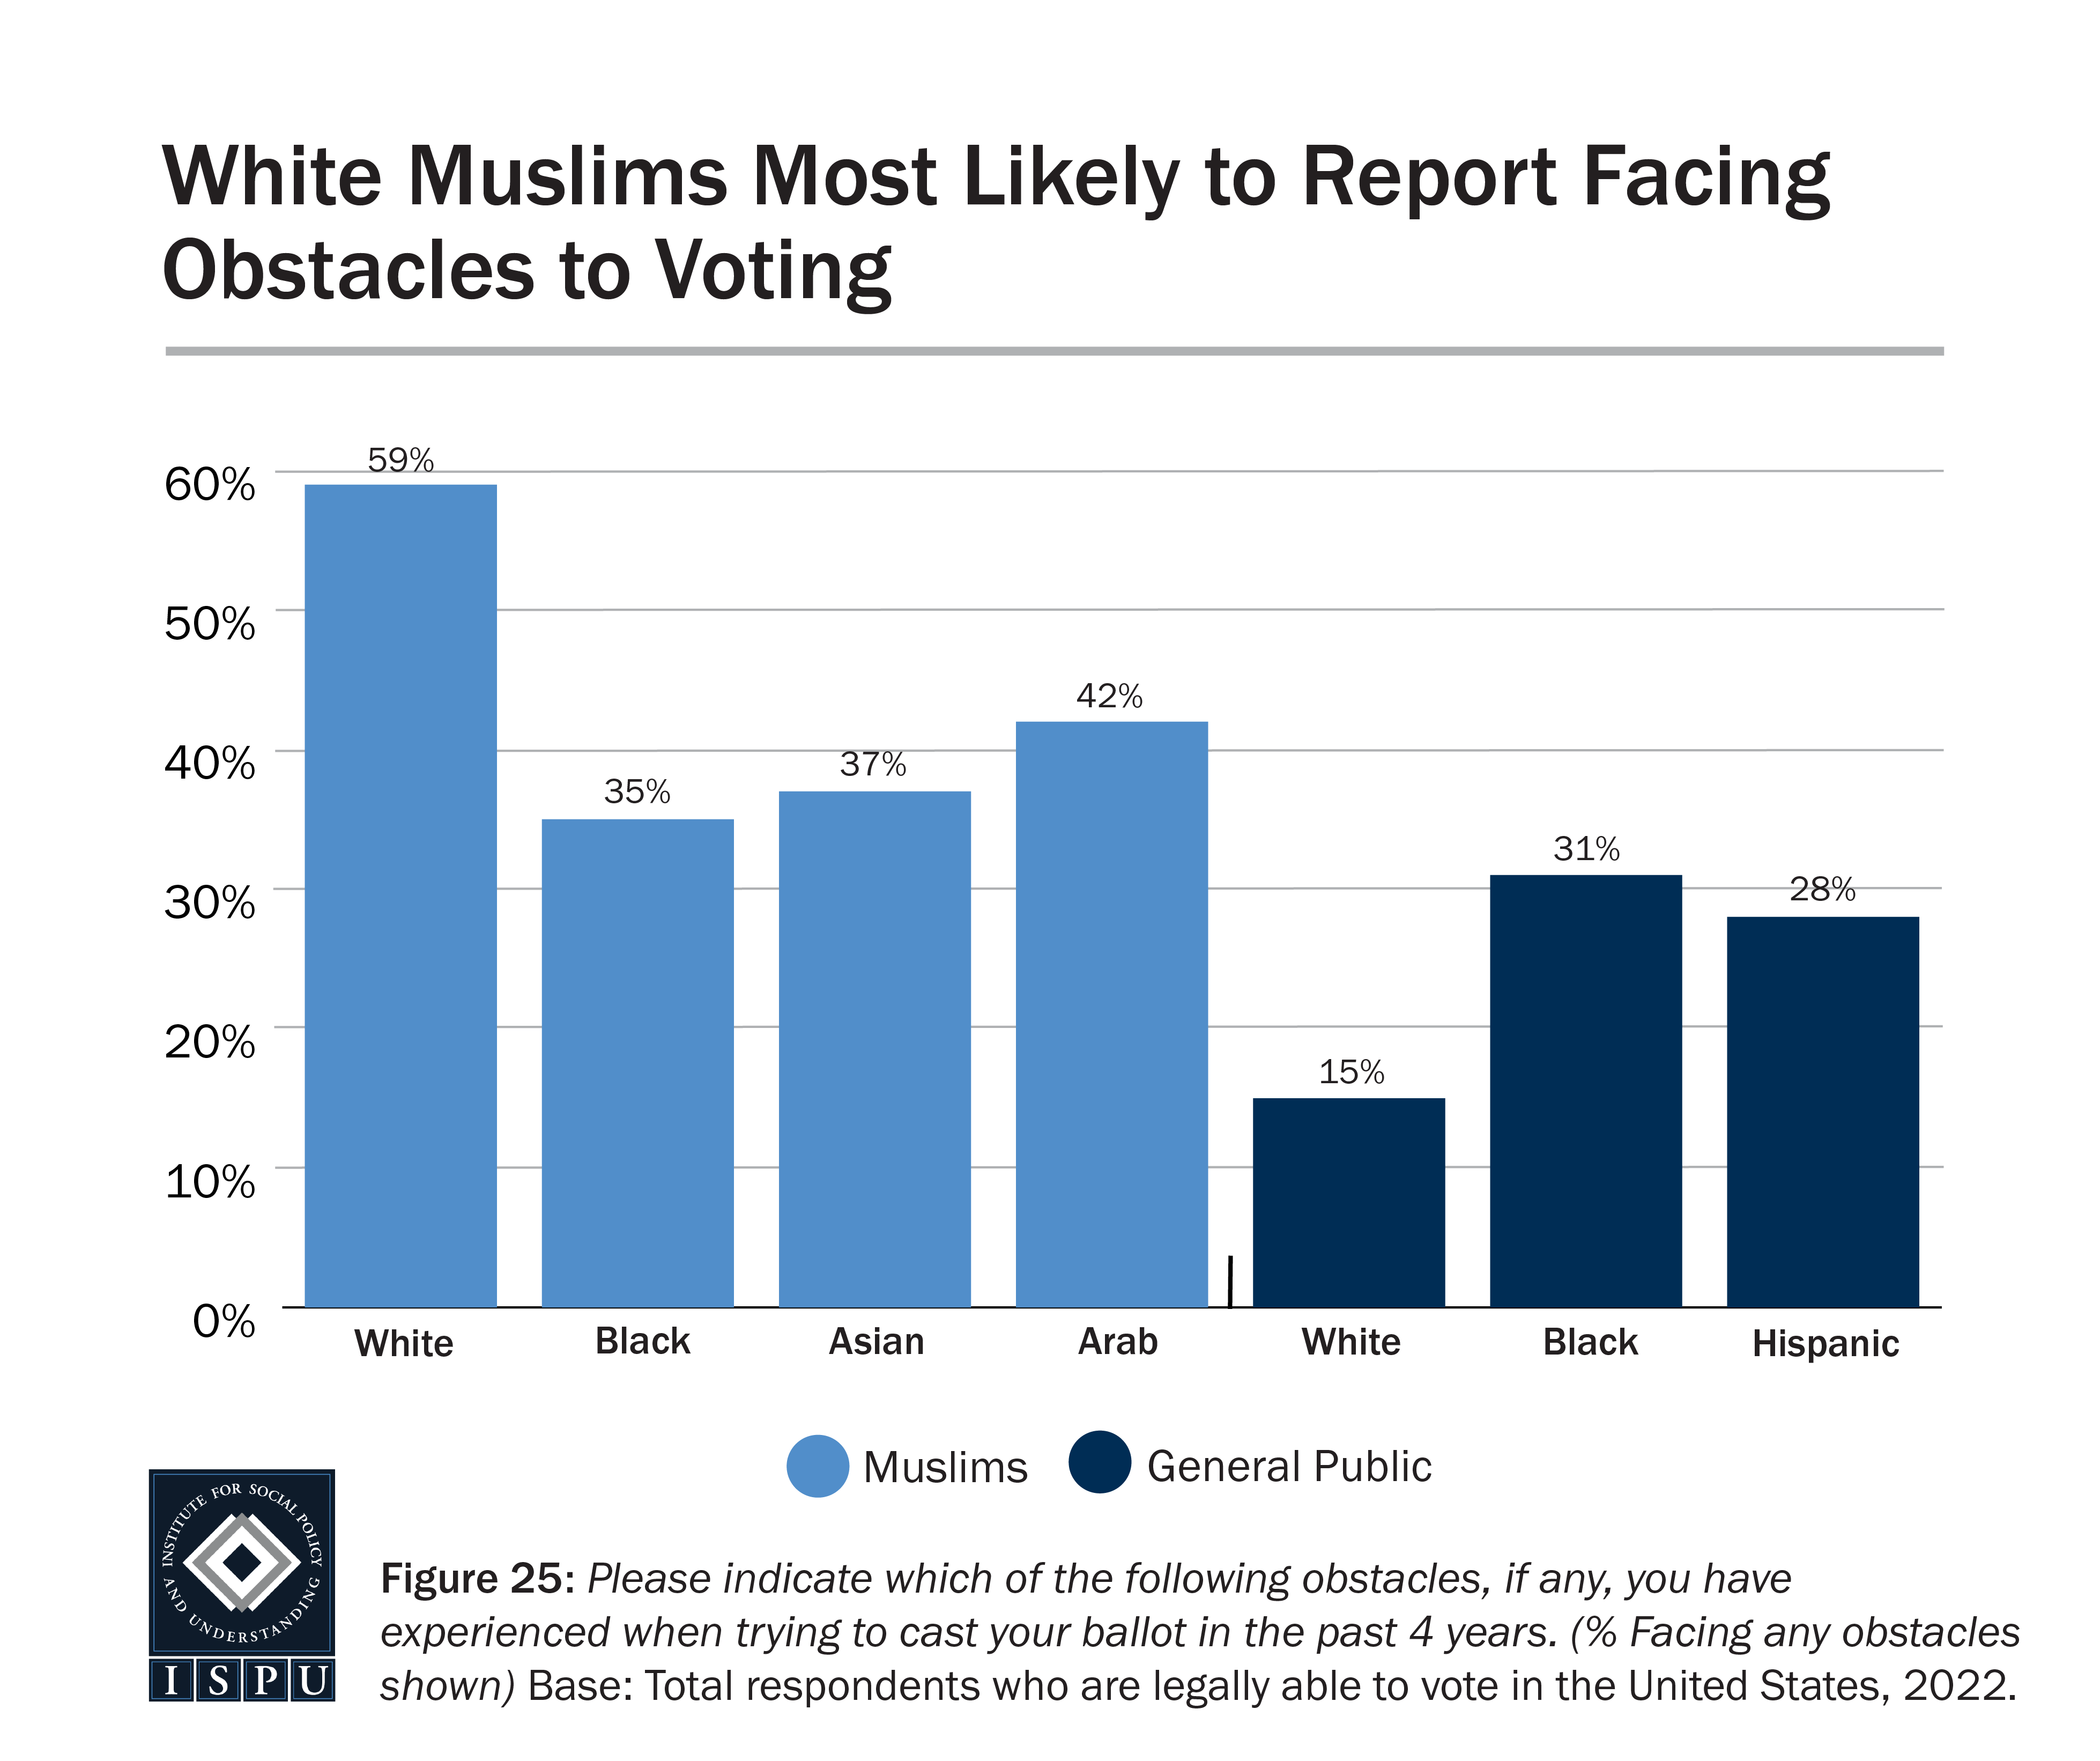 A bar graph showing the proportion of racial/ethnic groups among Muslims and the general public that report facing obstacles to voting during the past 4 years.